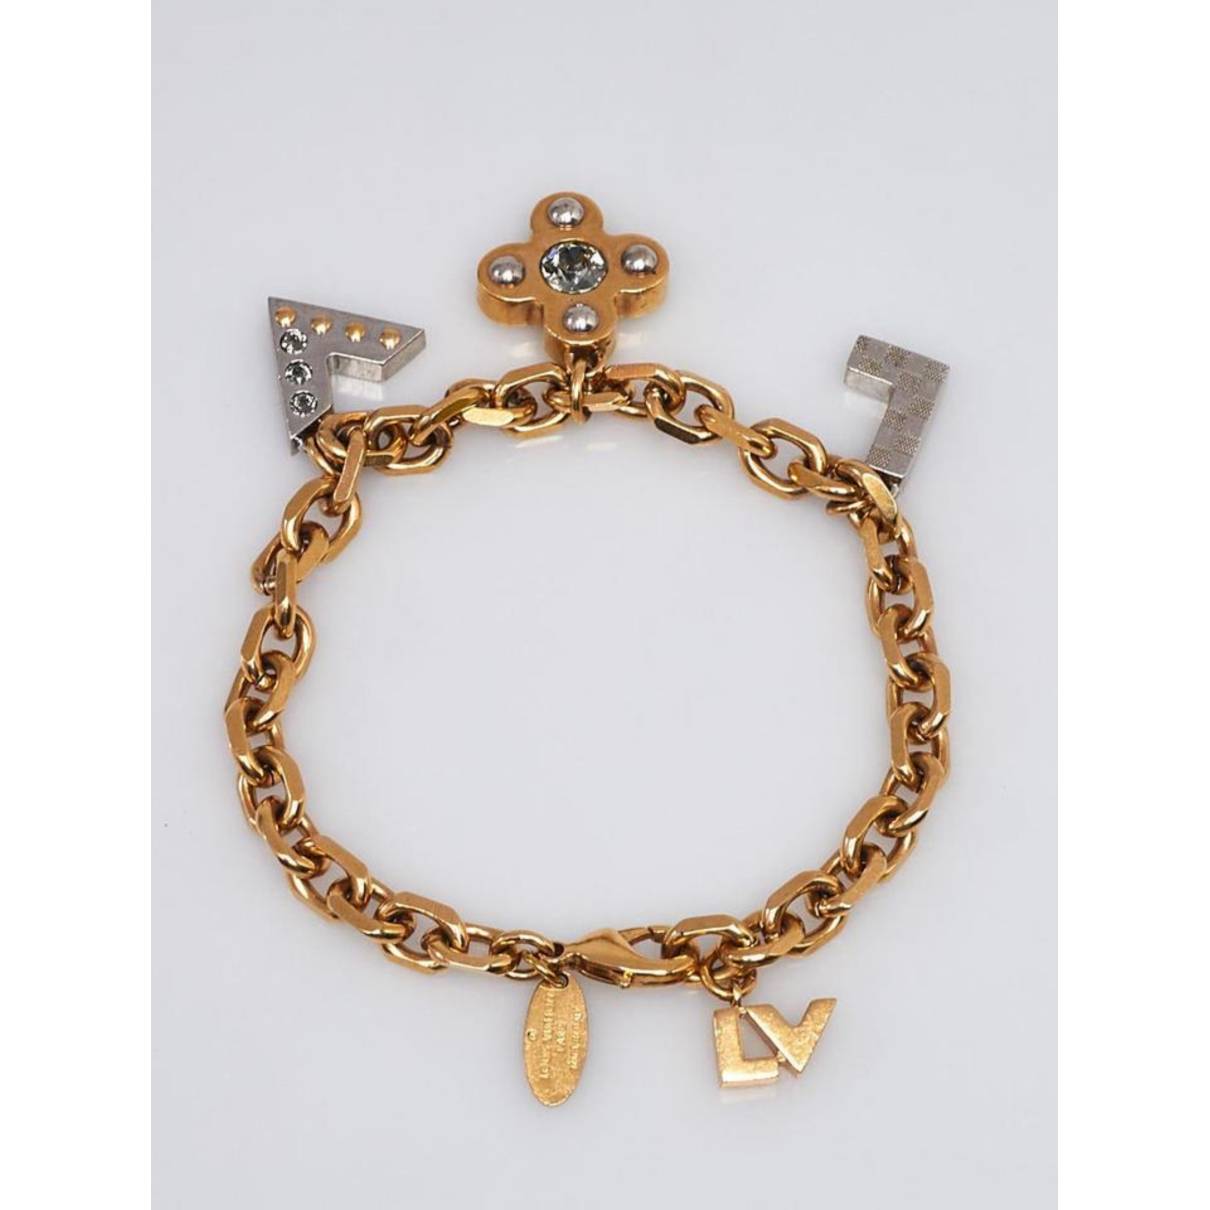 Louis Vuitton - Authenticated L to V Bracelet - Metal Gold for Women, Very Good Condition